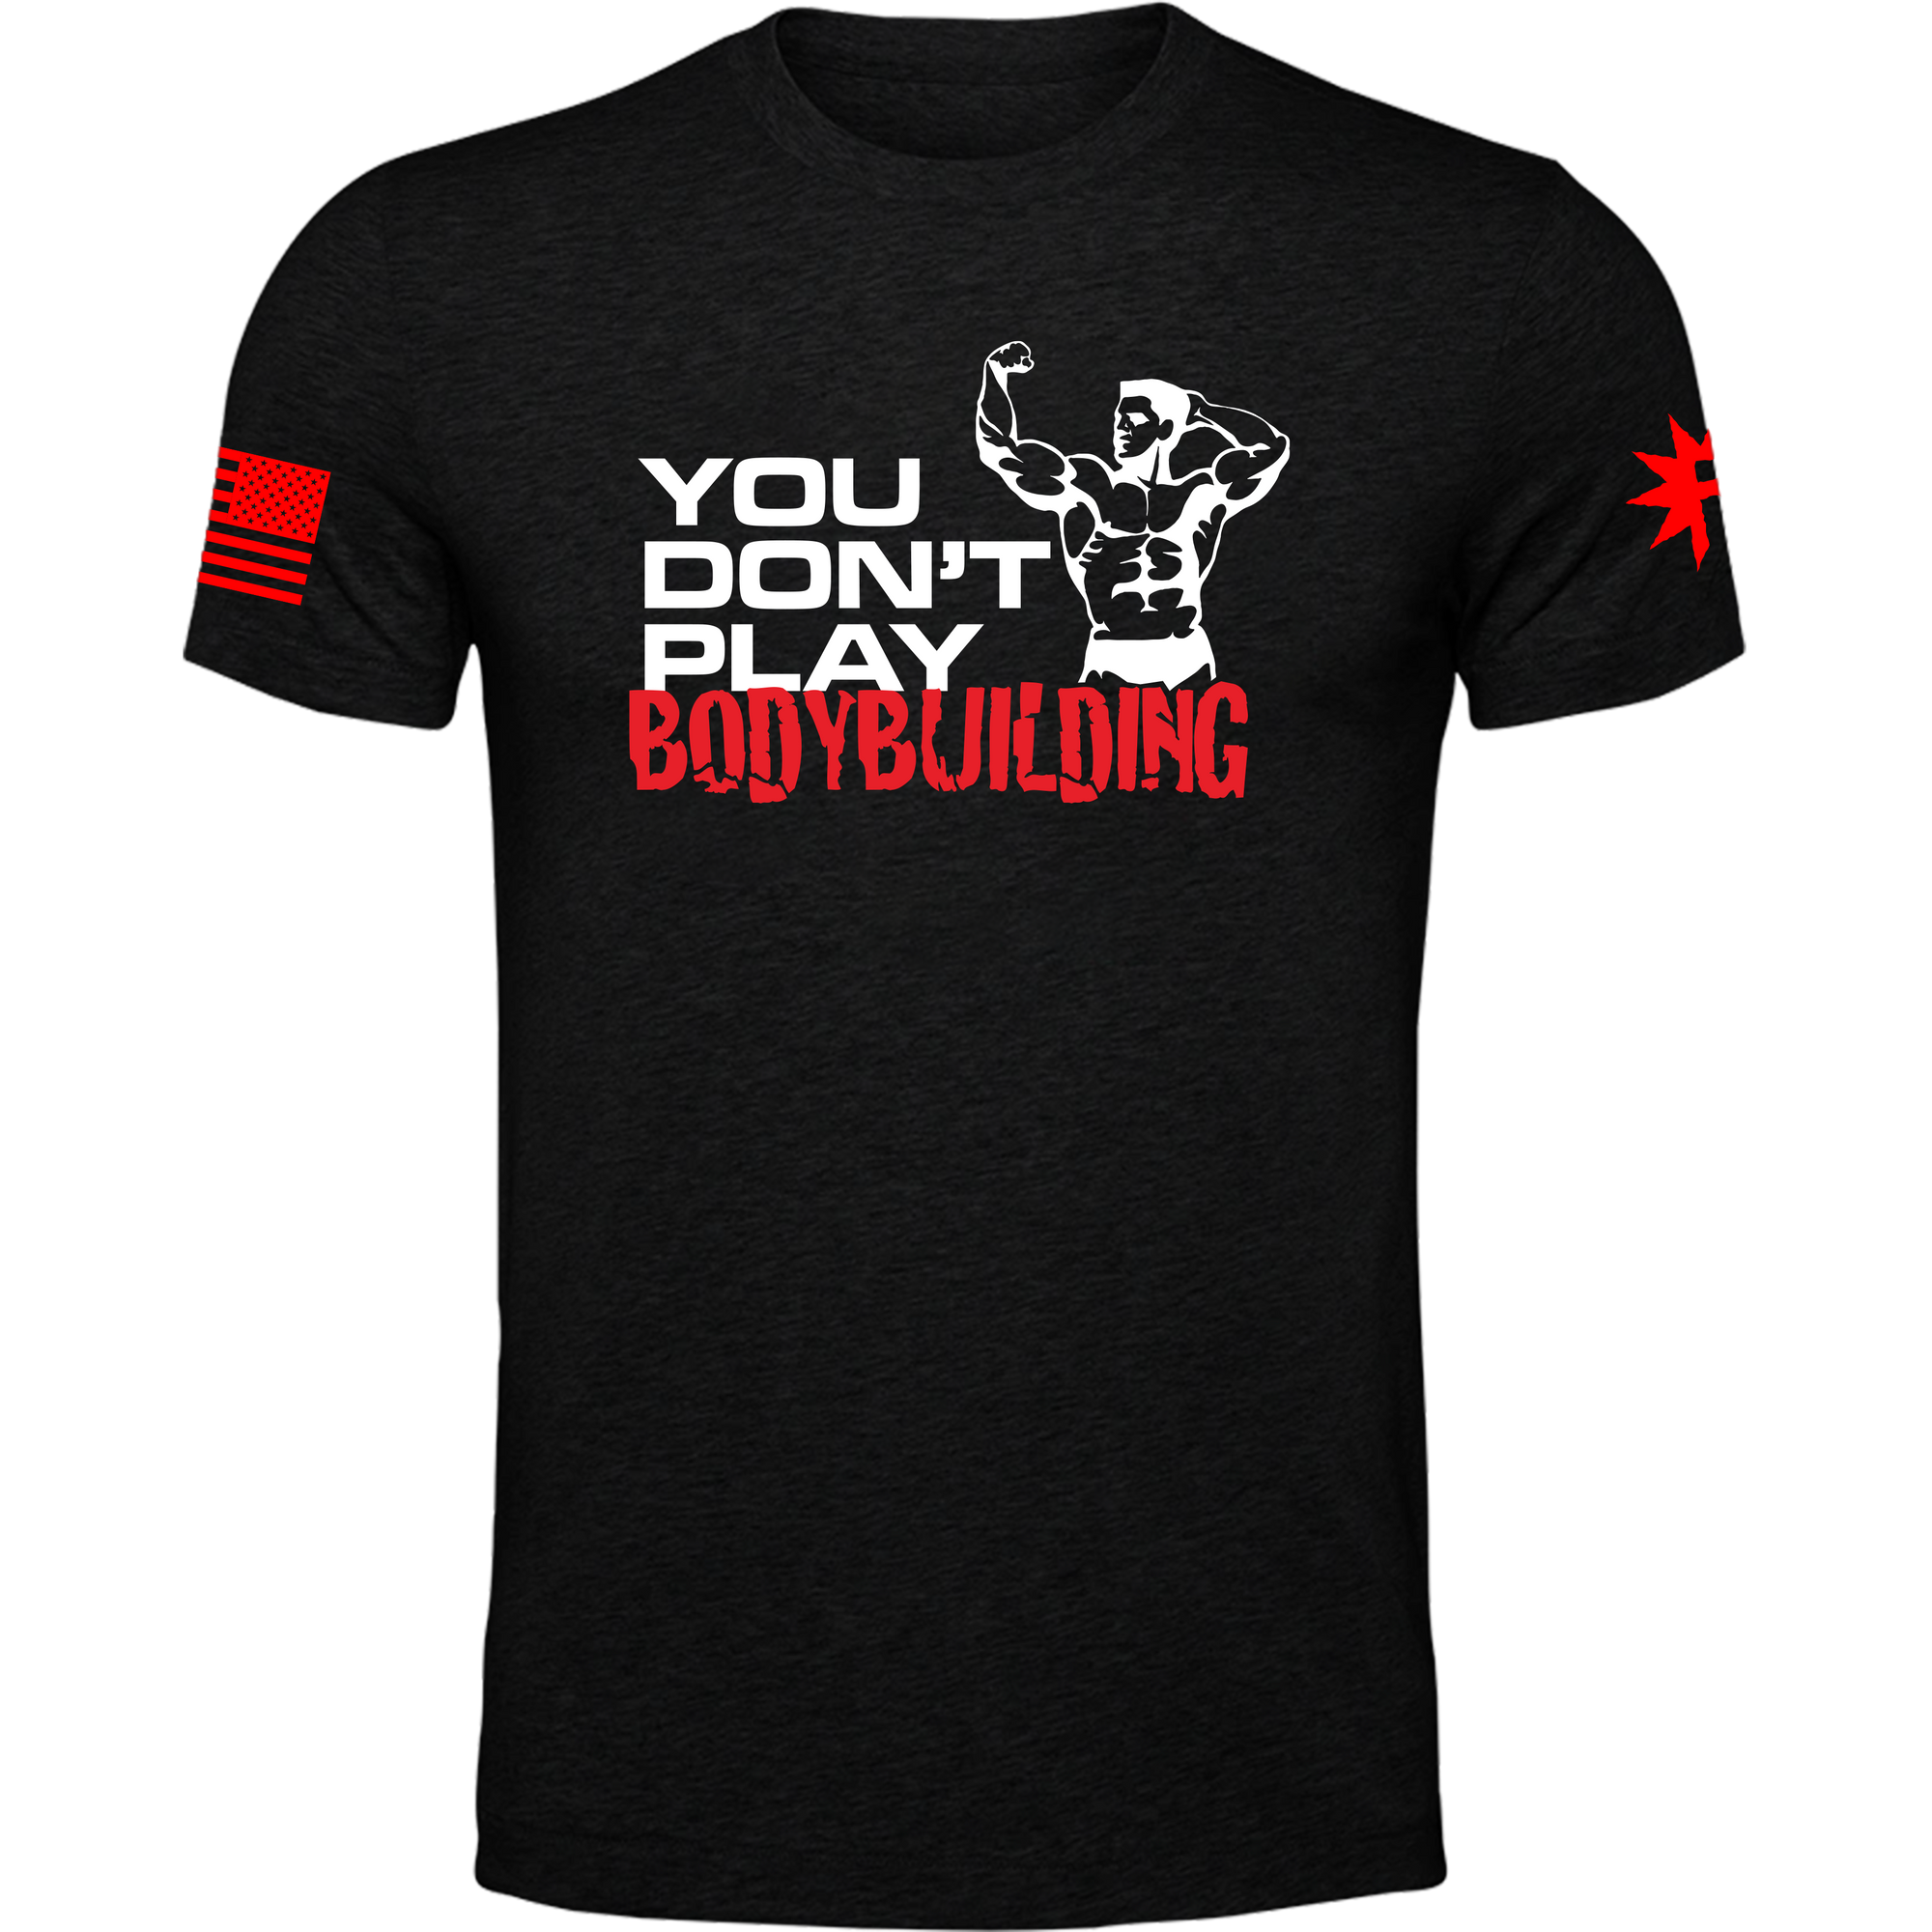 You Don't Play Bodybuilding Tee